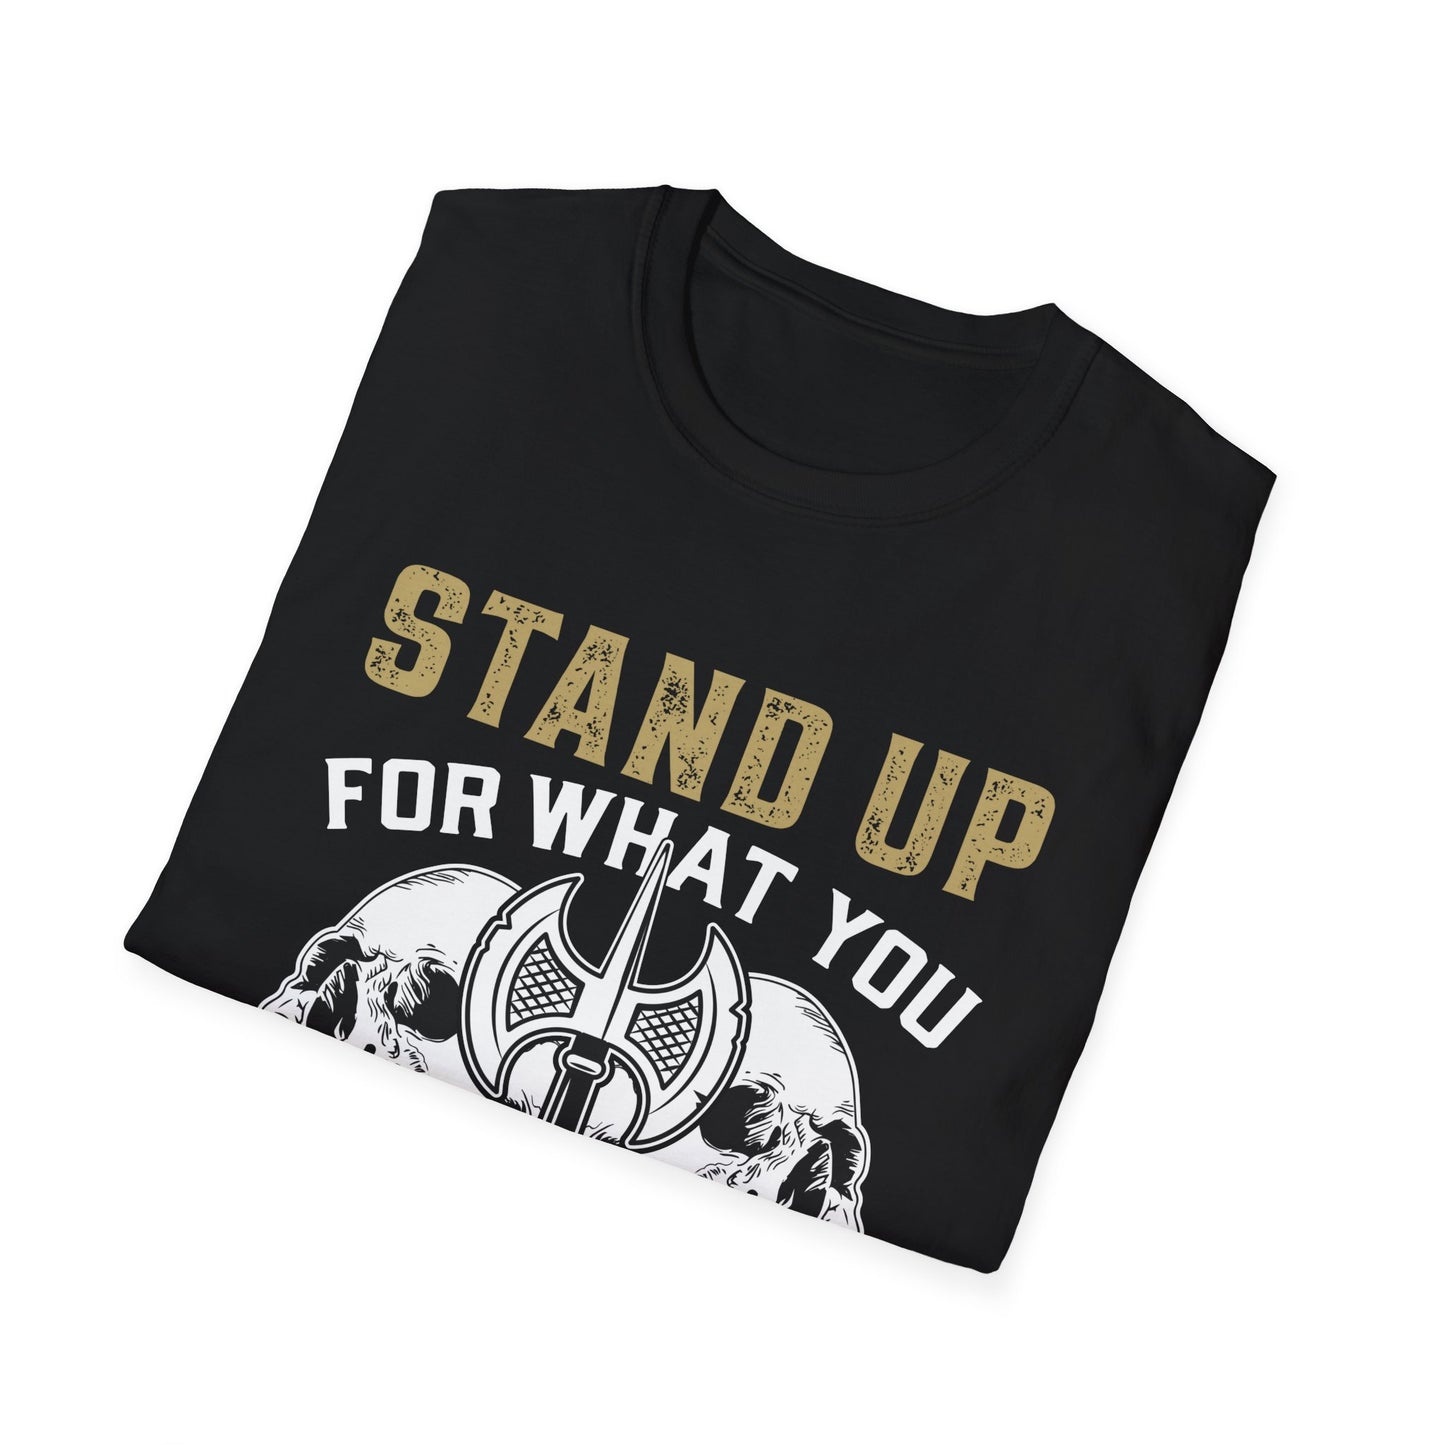 Stand Up For What You Believe In Even If You Stand Alone T-Shirt